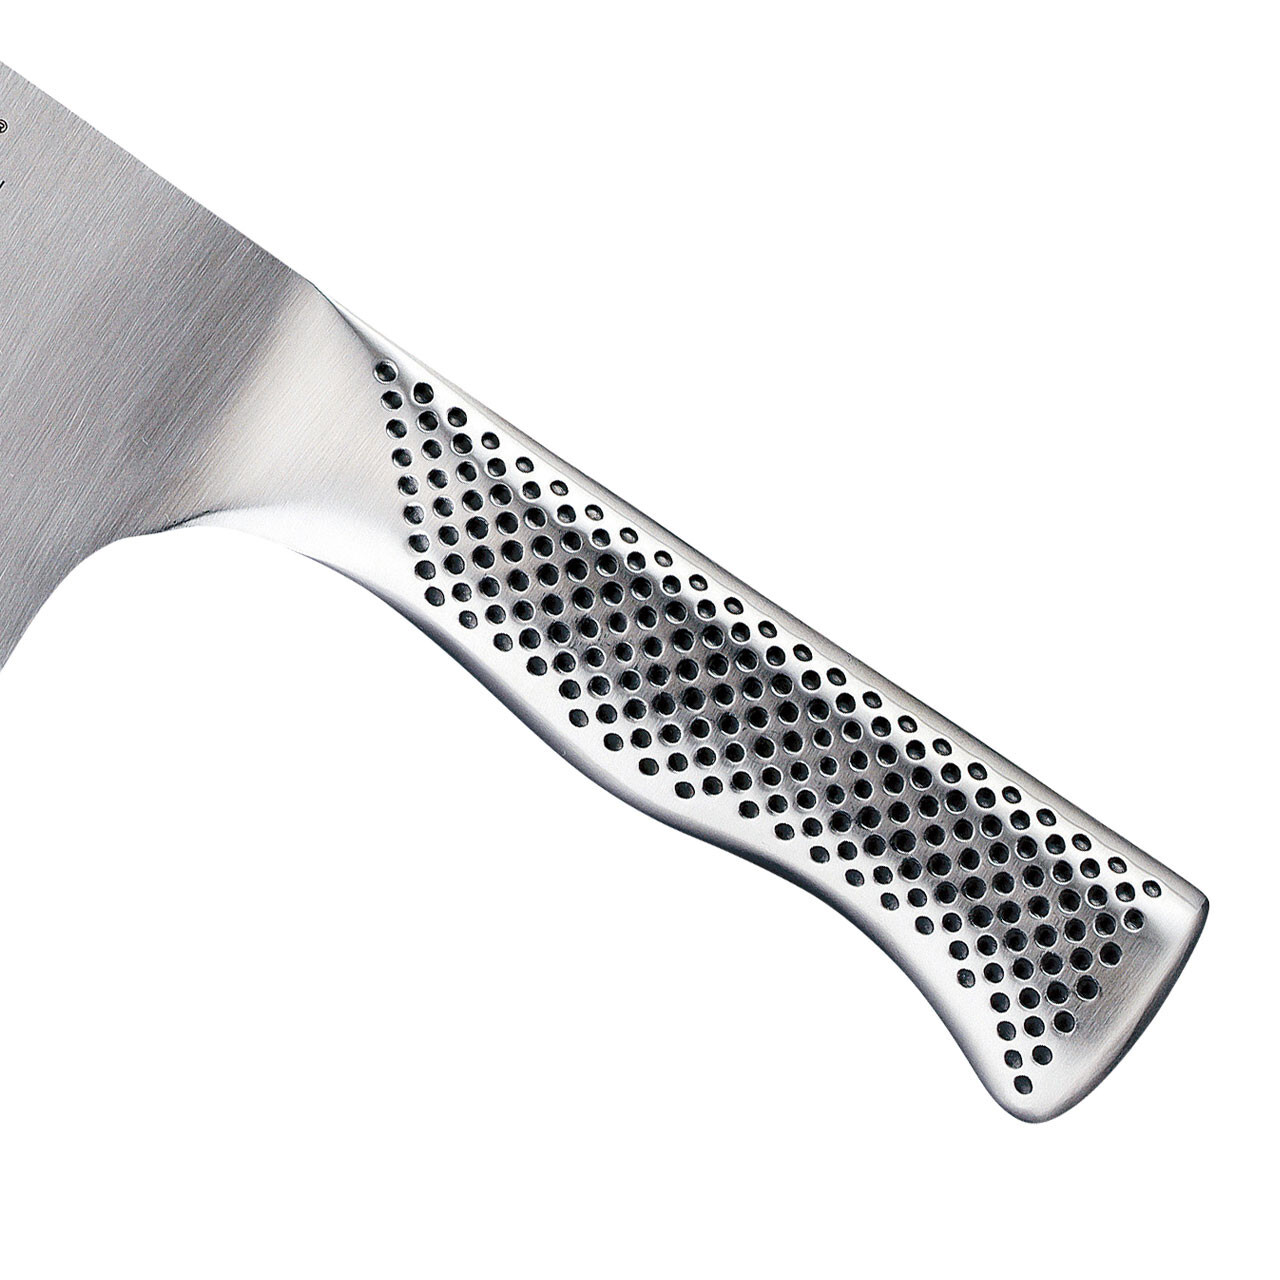 Buy Global G-12 Meat Cleaver 16 cm from Global